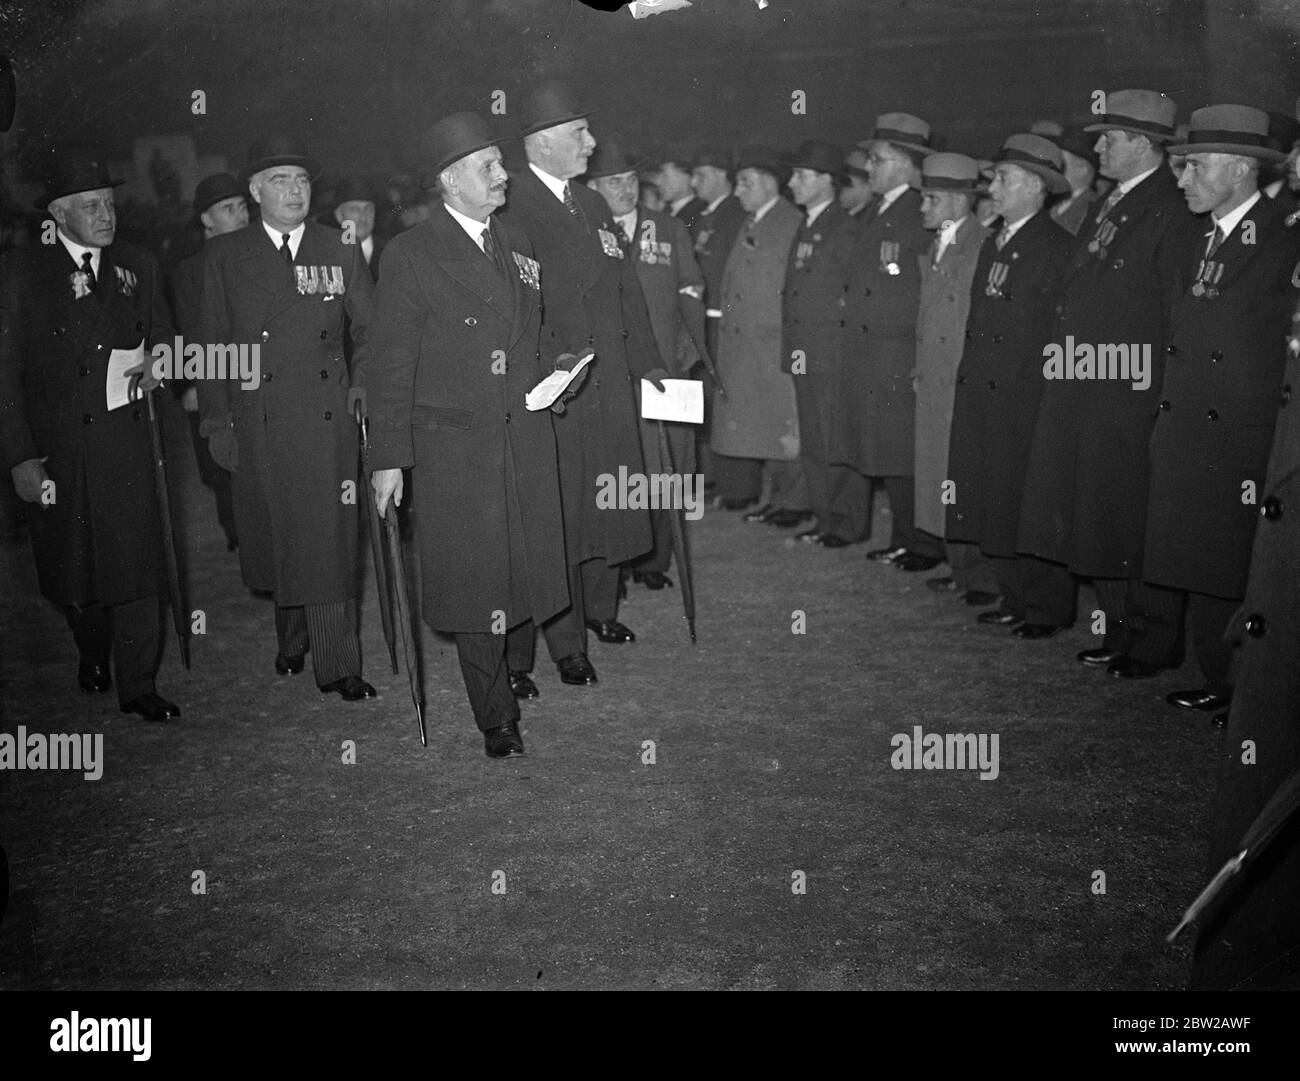 War Minister at Jewish ex-servicemen's Armistice service. The Earl of Athlone and Mr Leslie Hore Belisha, the war Minister, made the inspection when they attended the Jewish ex-servicemen's Armistice Service on the Horse Guards Parade, London, today (Armistice Sunday). 7 November 1937 Stock Photo